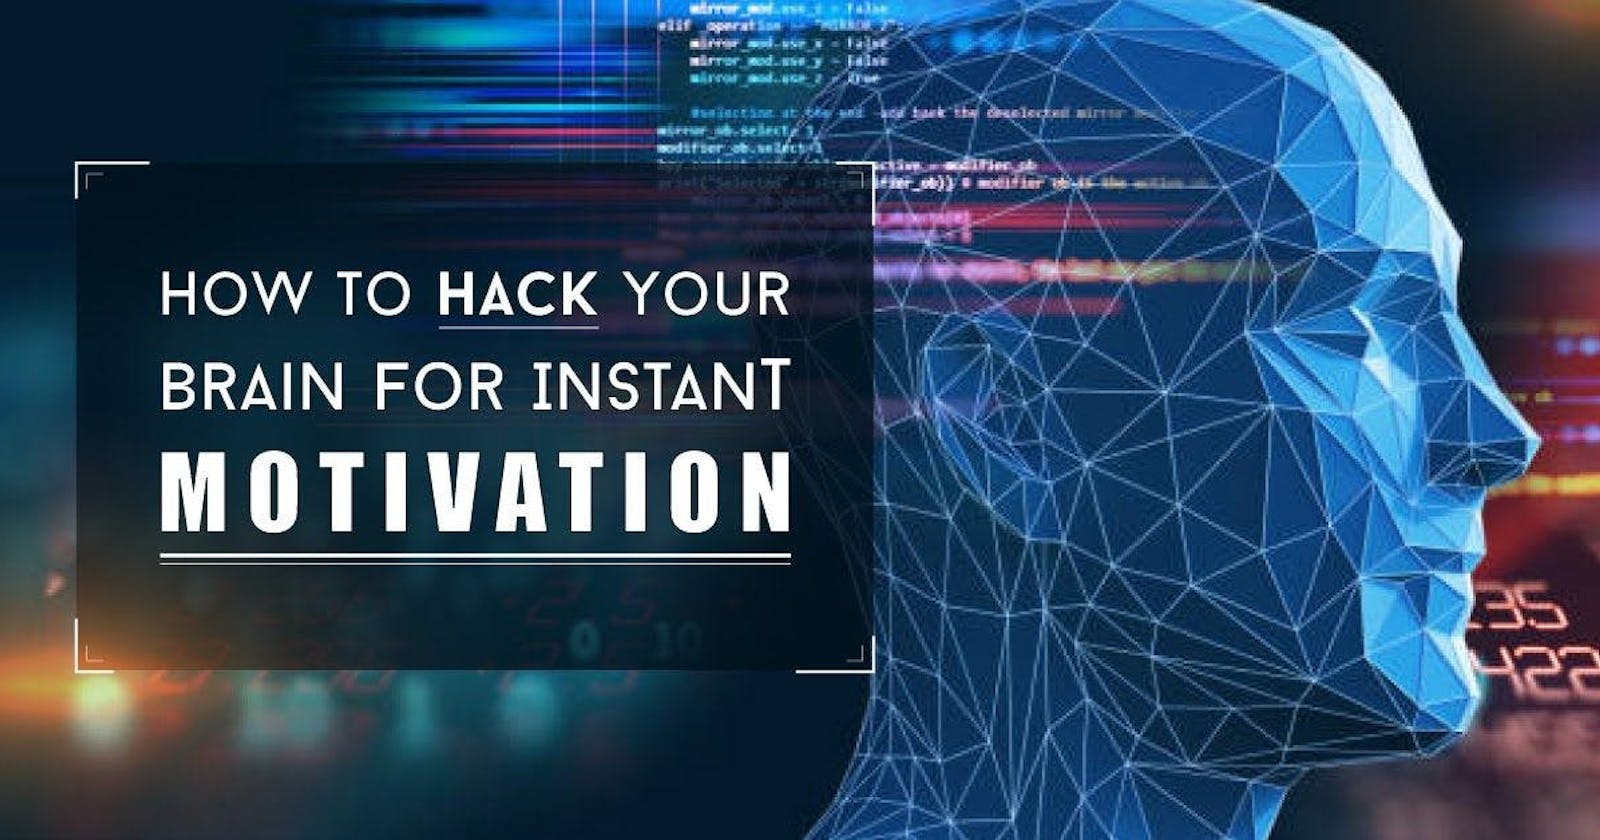 How to Hack Your Brain for Instant Motivation